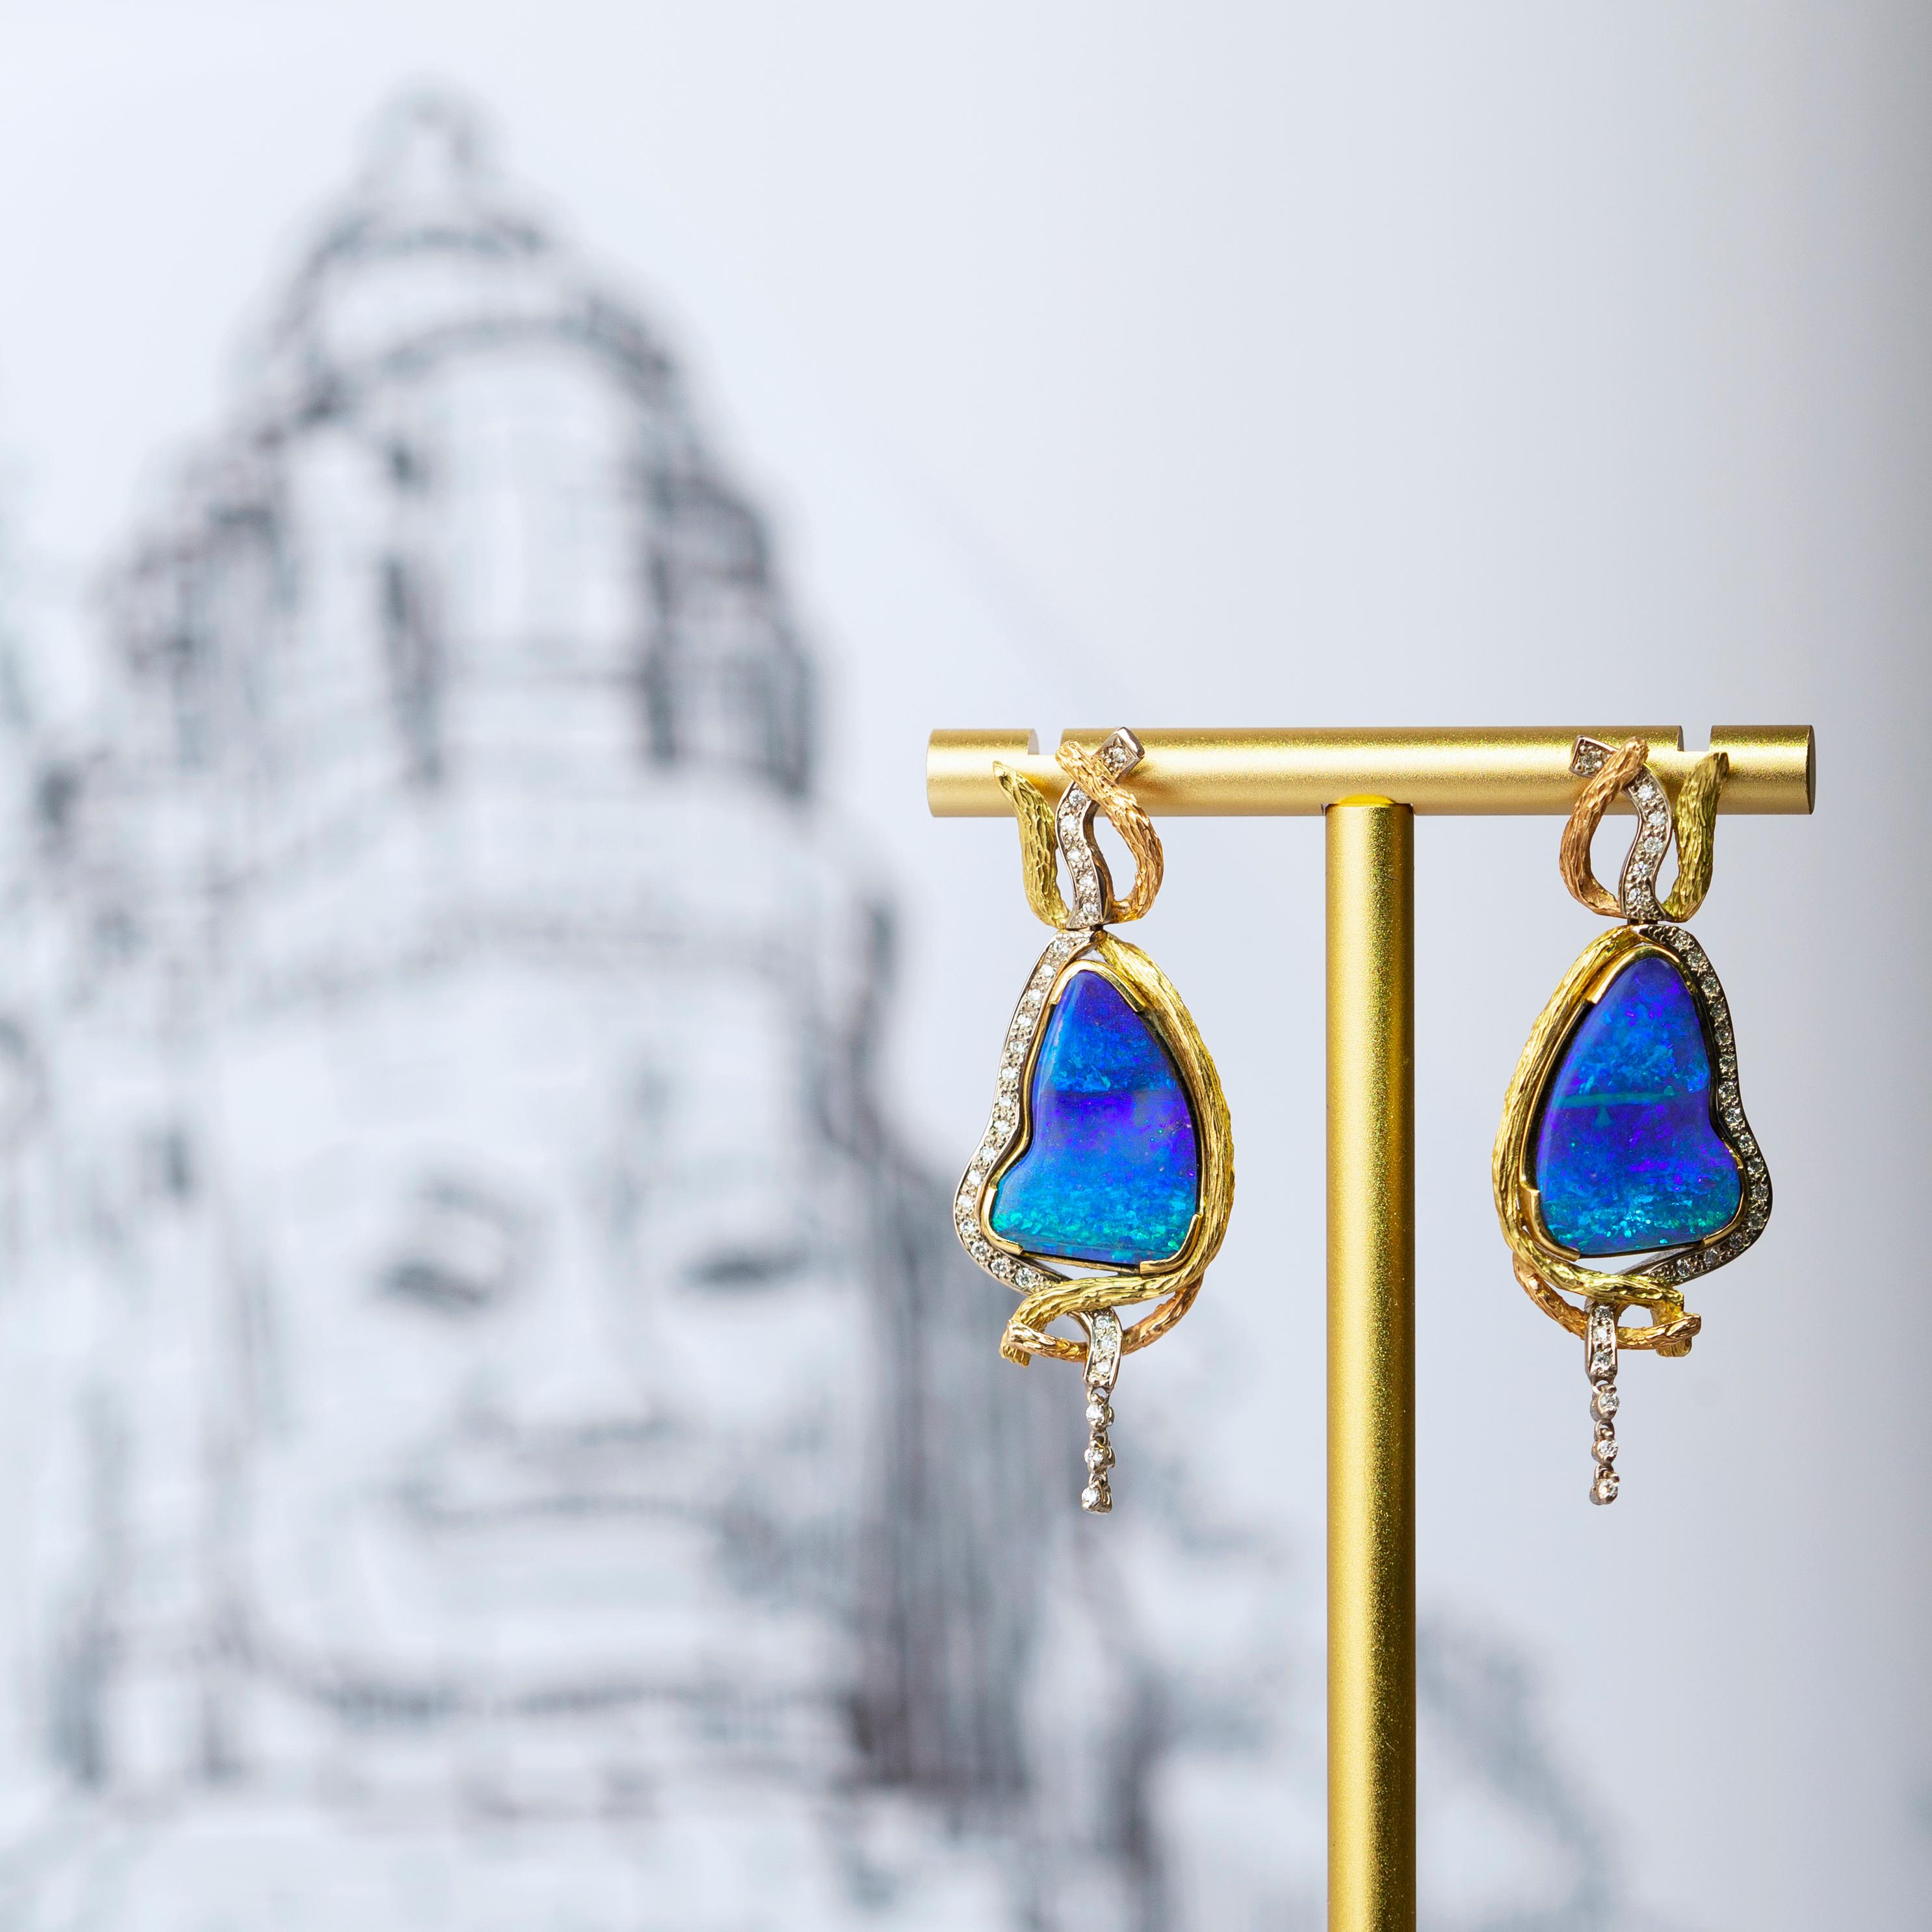 The magnificent “Ta Prohm” earrings celebrate the ancient wisdom and marvellous creativity of the revered and well-known ancient Cambodian temple. The luxurious pair of magic boulder opals (18.55ct) of this piece is sourced from Winton, Queensland